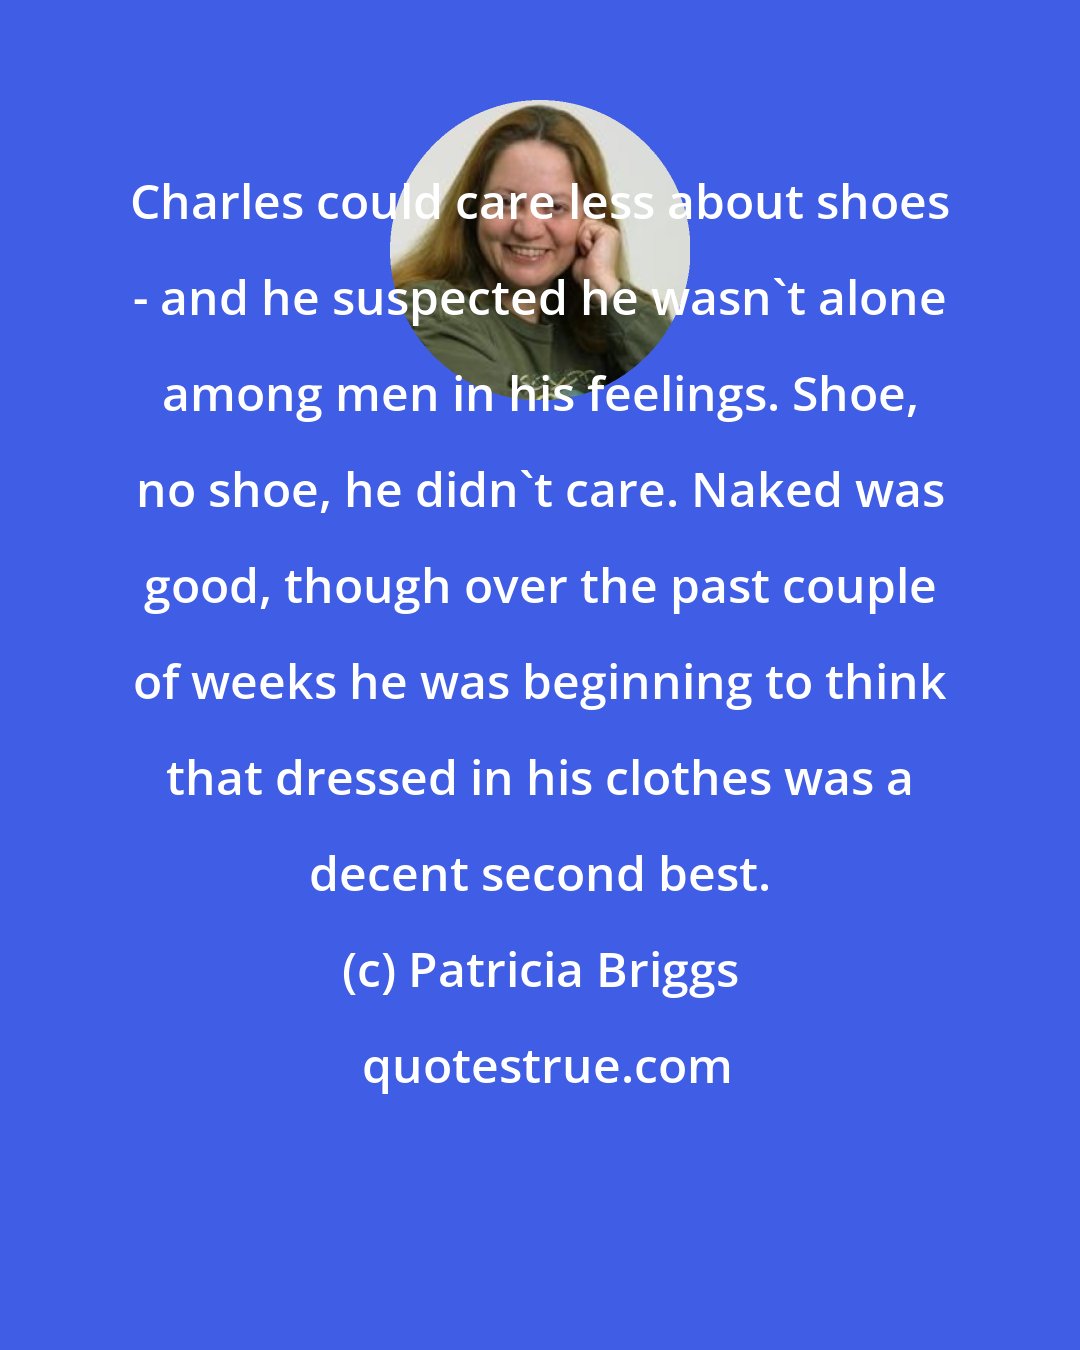 Patricia Briggs: Charles could care less about shoes - and he suspected he wasn't alone among men in his feelings. Shoe, no shoe, he didn't care. Naked was good, though over the past couple of weeks he was beginning to think that dressed in his clothes was a decent second best.